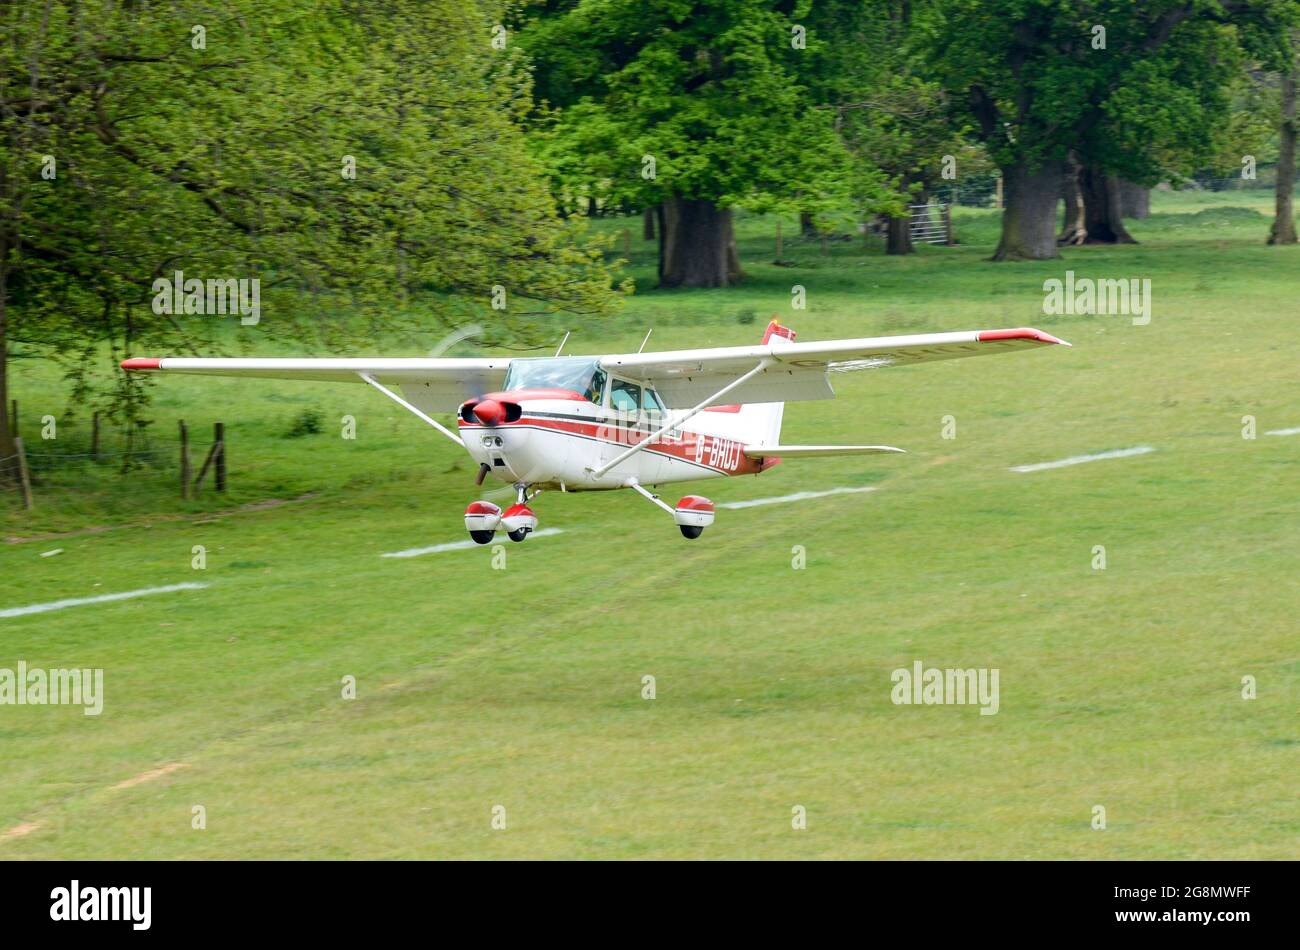 Cessna 172 Skyhawk plane taking off from a grass strip in a wooded, rural area. Henham Park temporary grass strip for country event Stock Photo